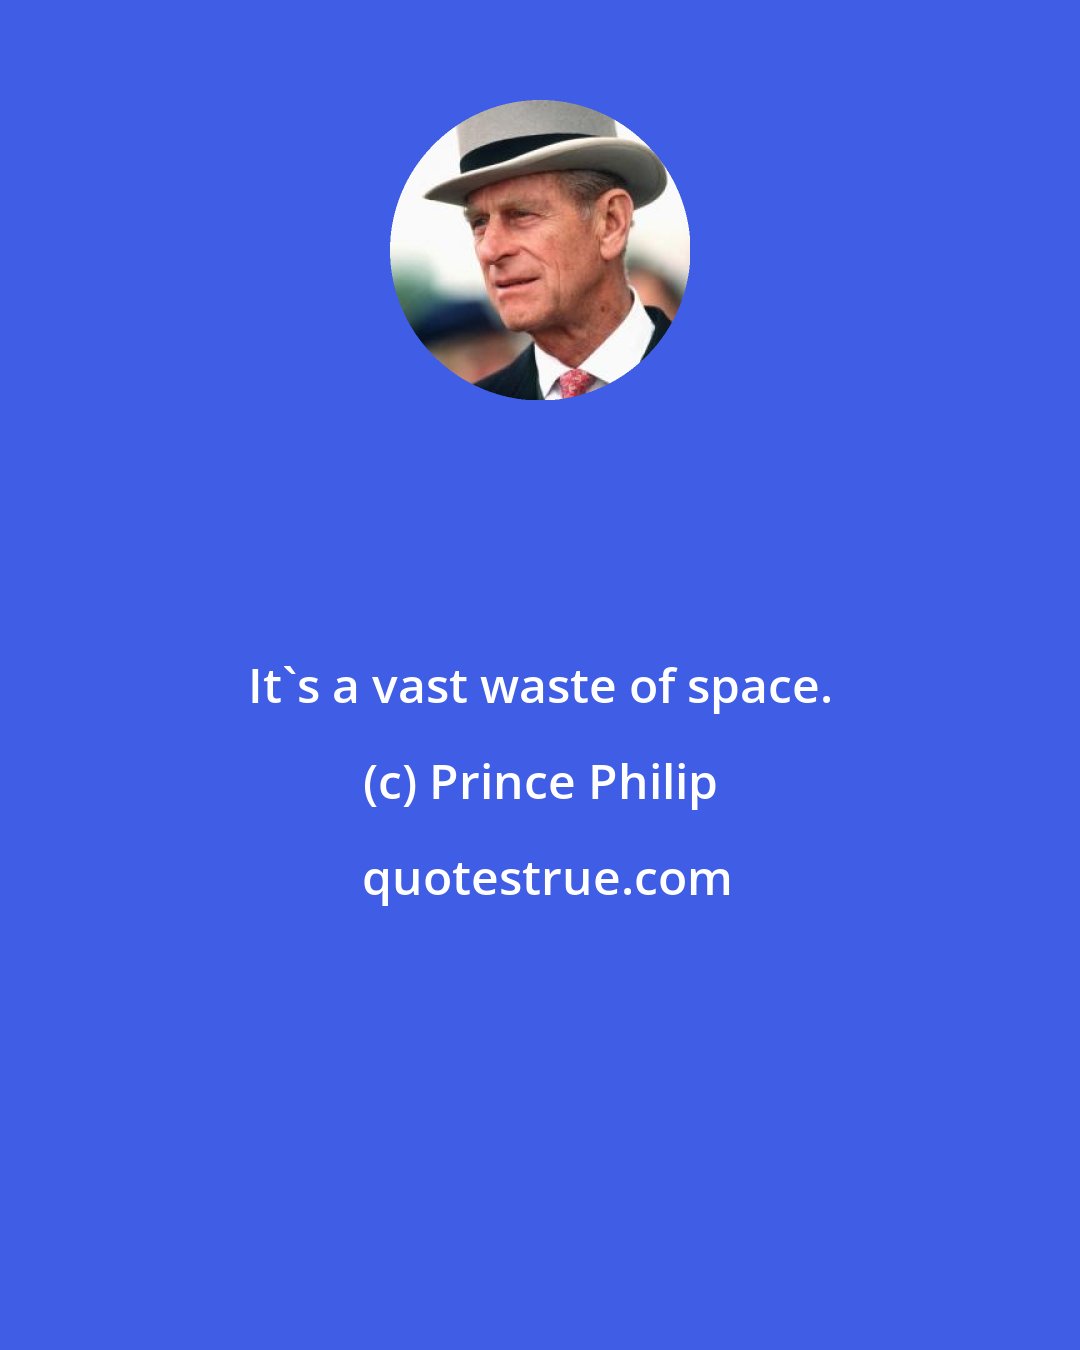 Prince Philip: It's a vast waste of space.